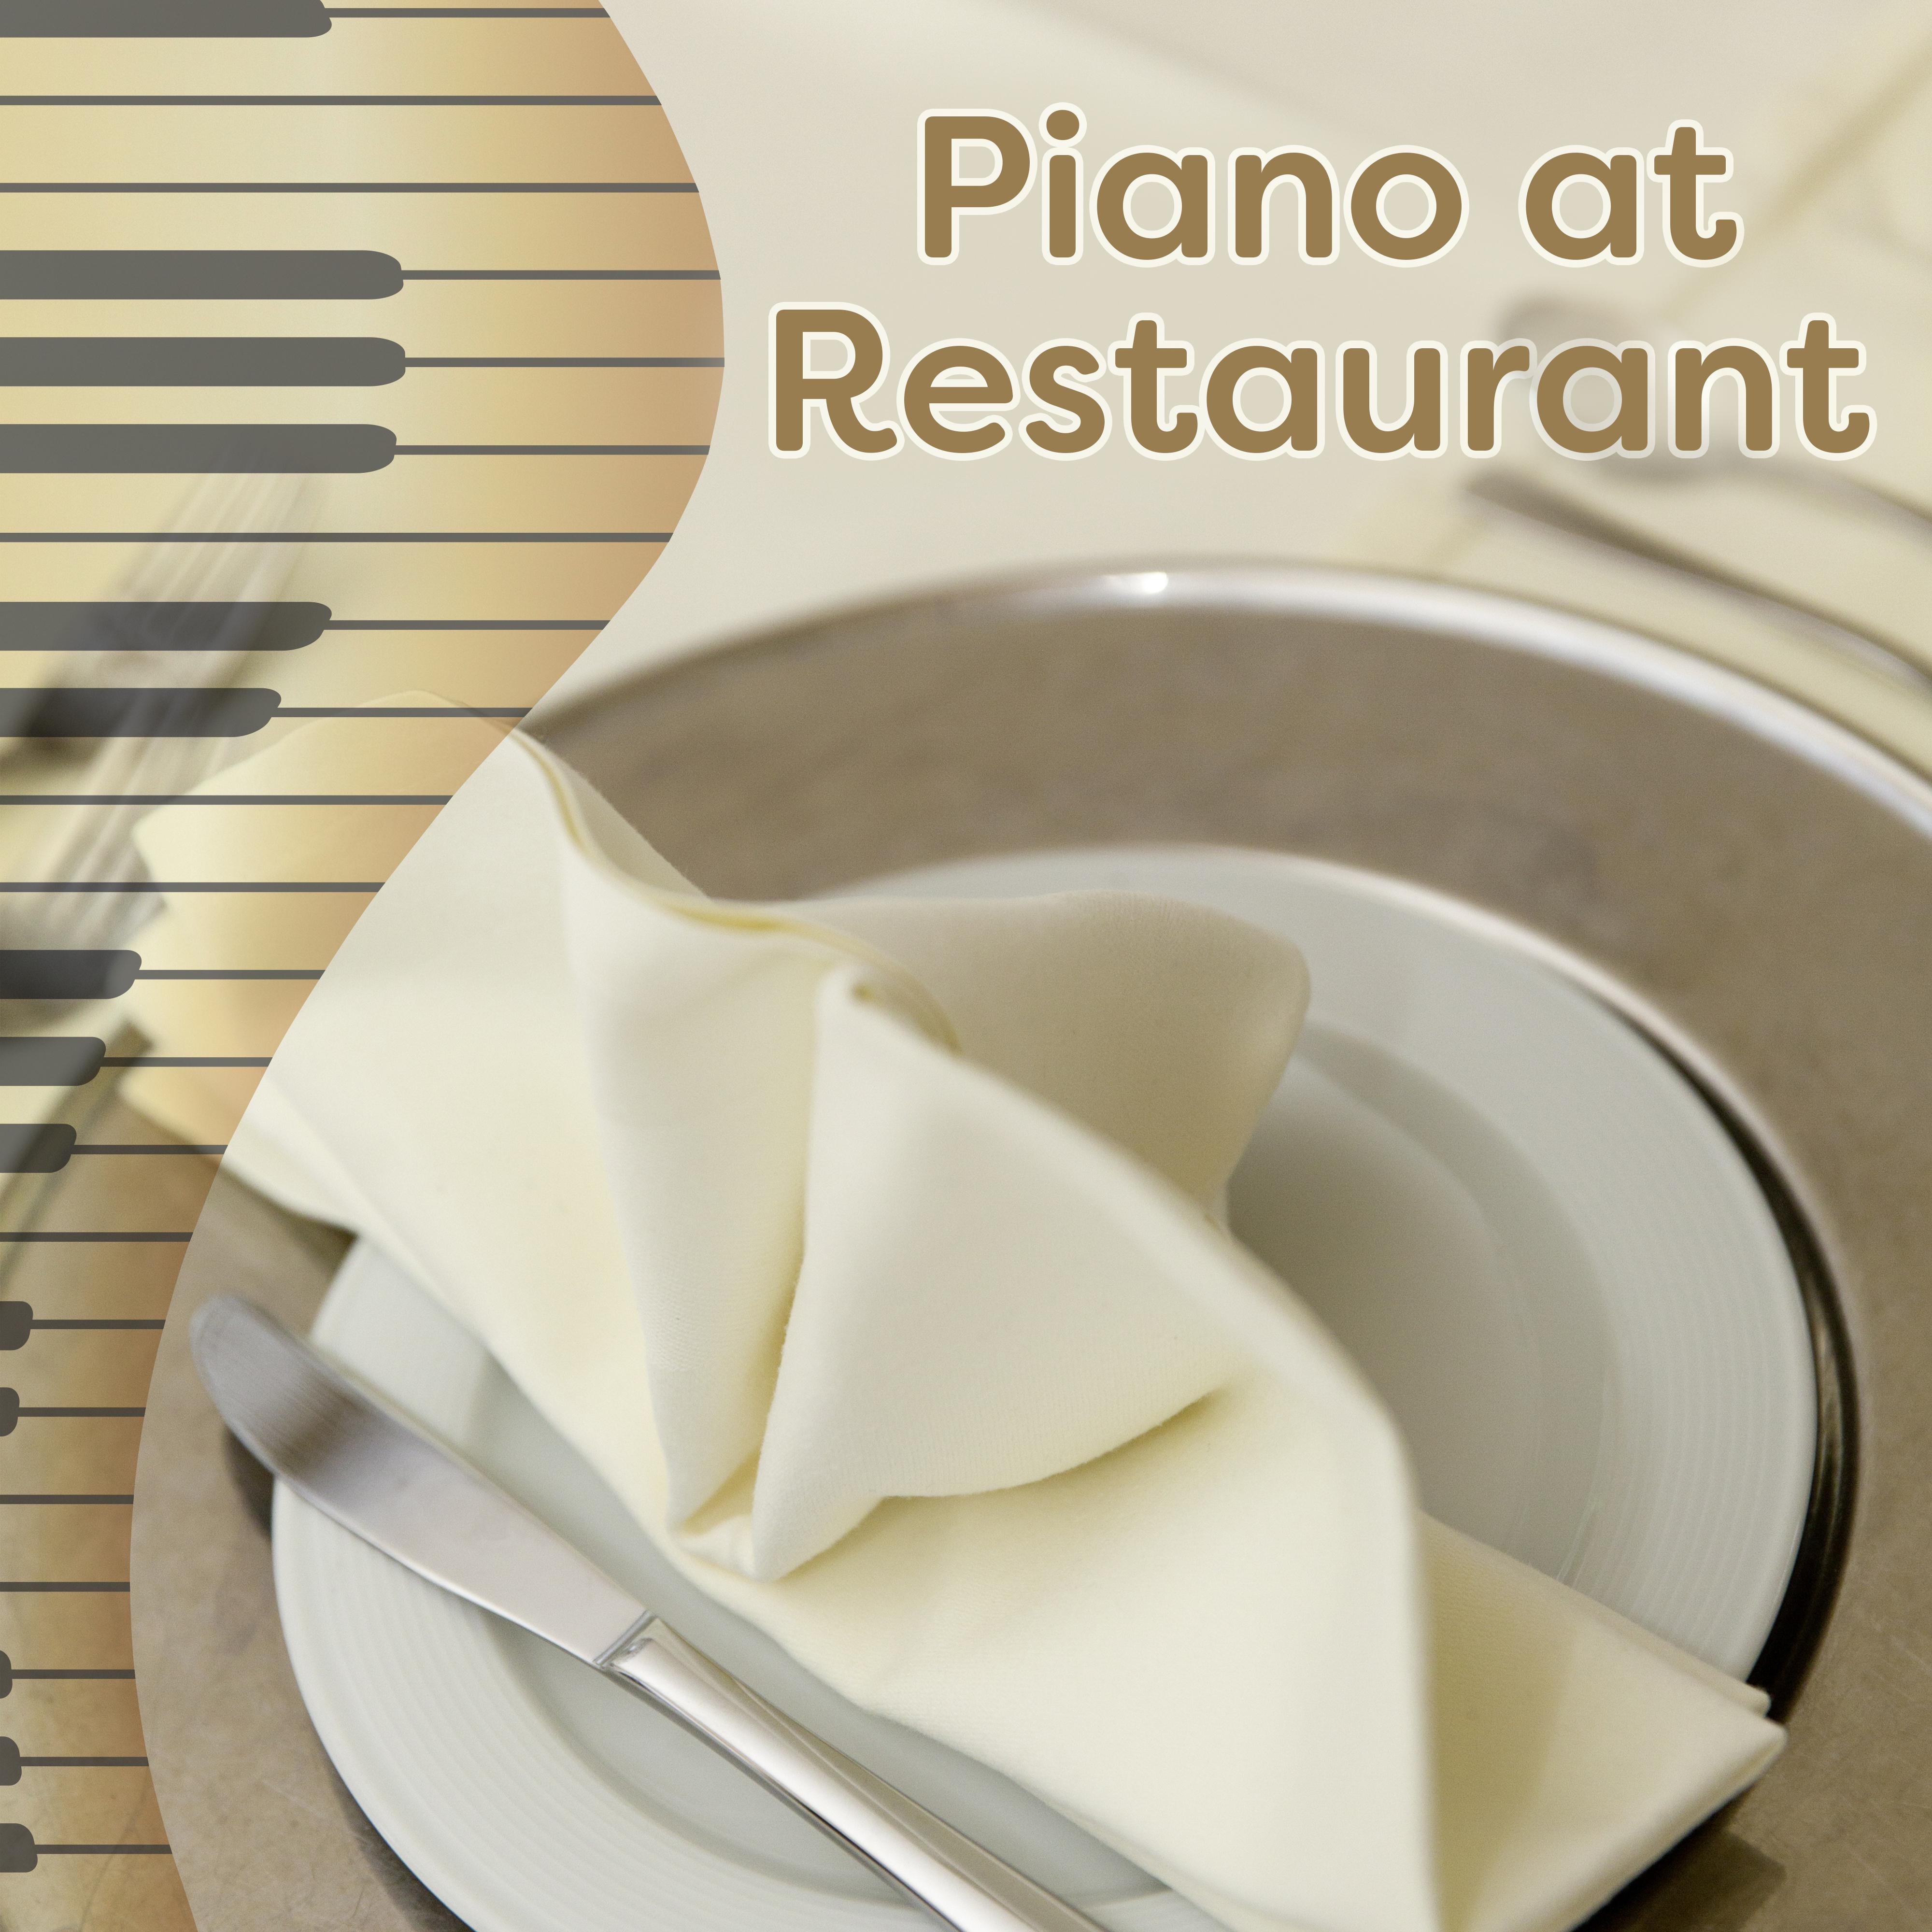 Piano at Restaurant – Calming Jazz Sounds, Ambient Instrumental Music, Background Music for Restaurant, Solo Piano